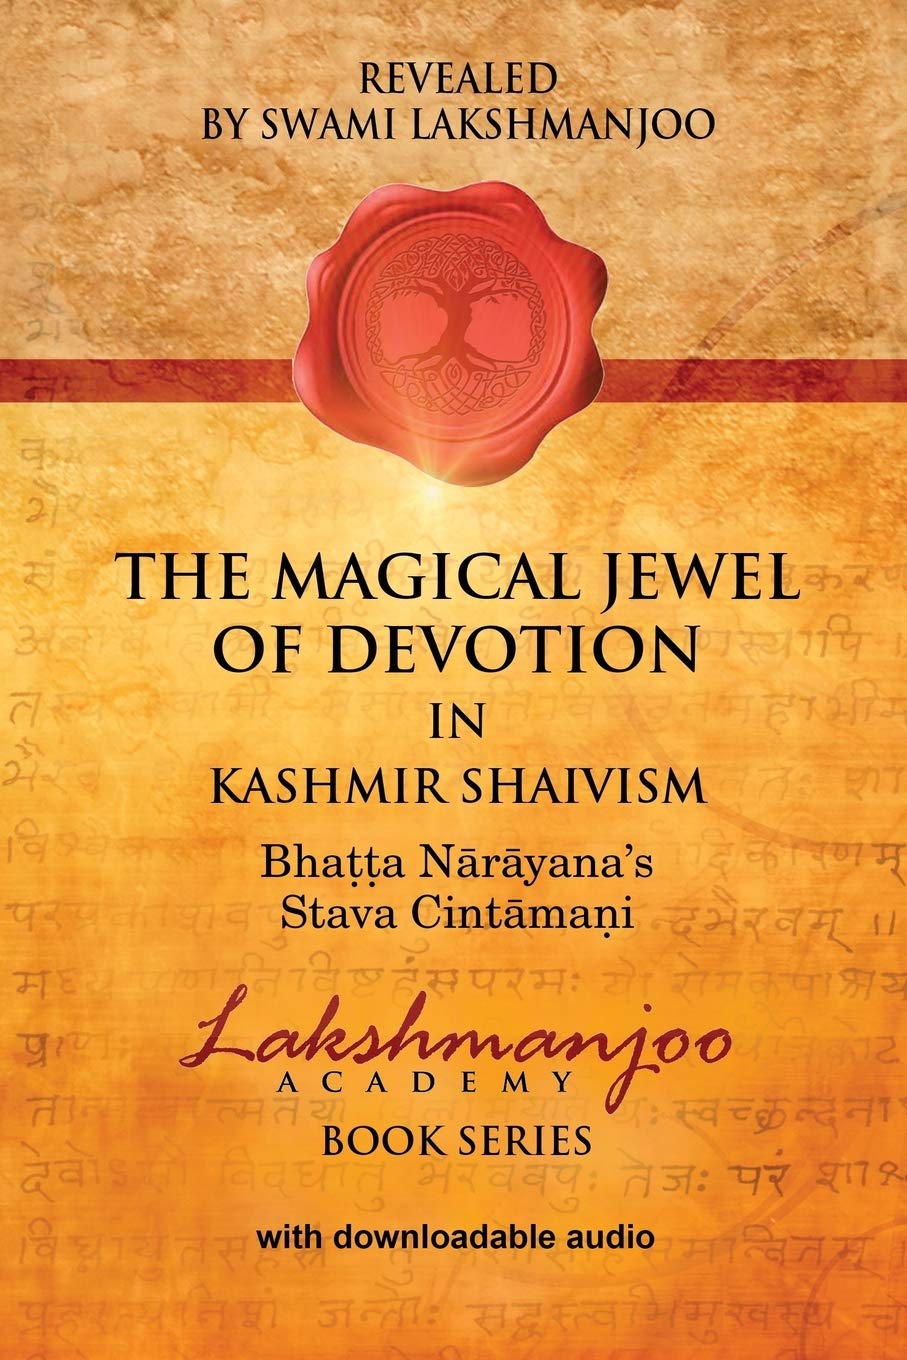 THE MAGICAL JEWEL OF DEVOTION IN KASHMIR SHAIVISM: